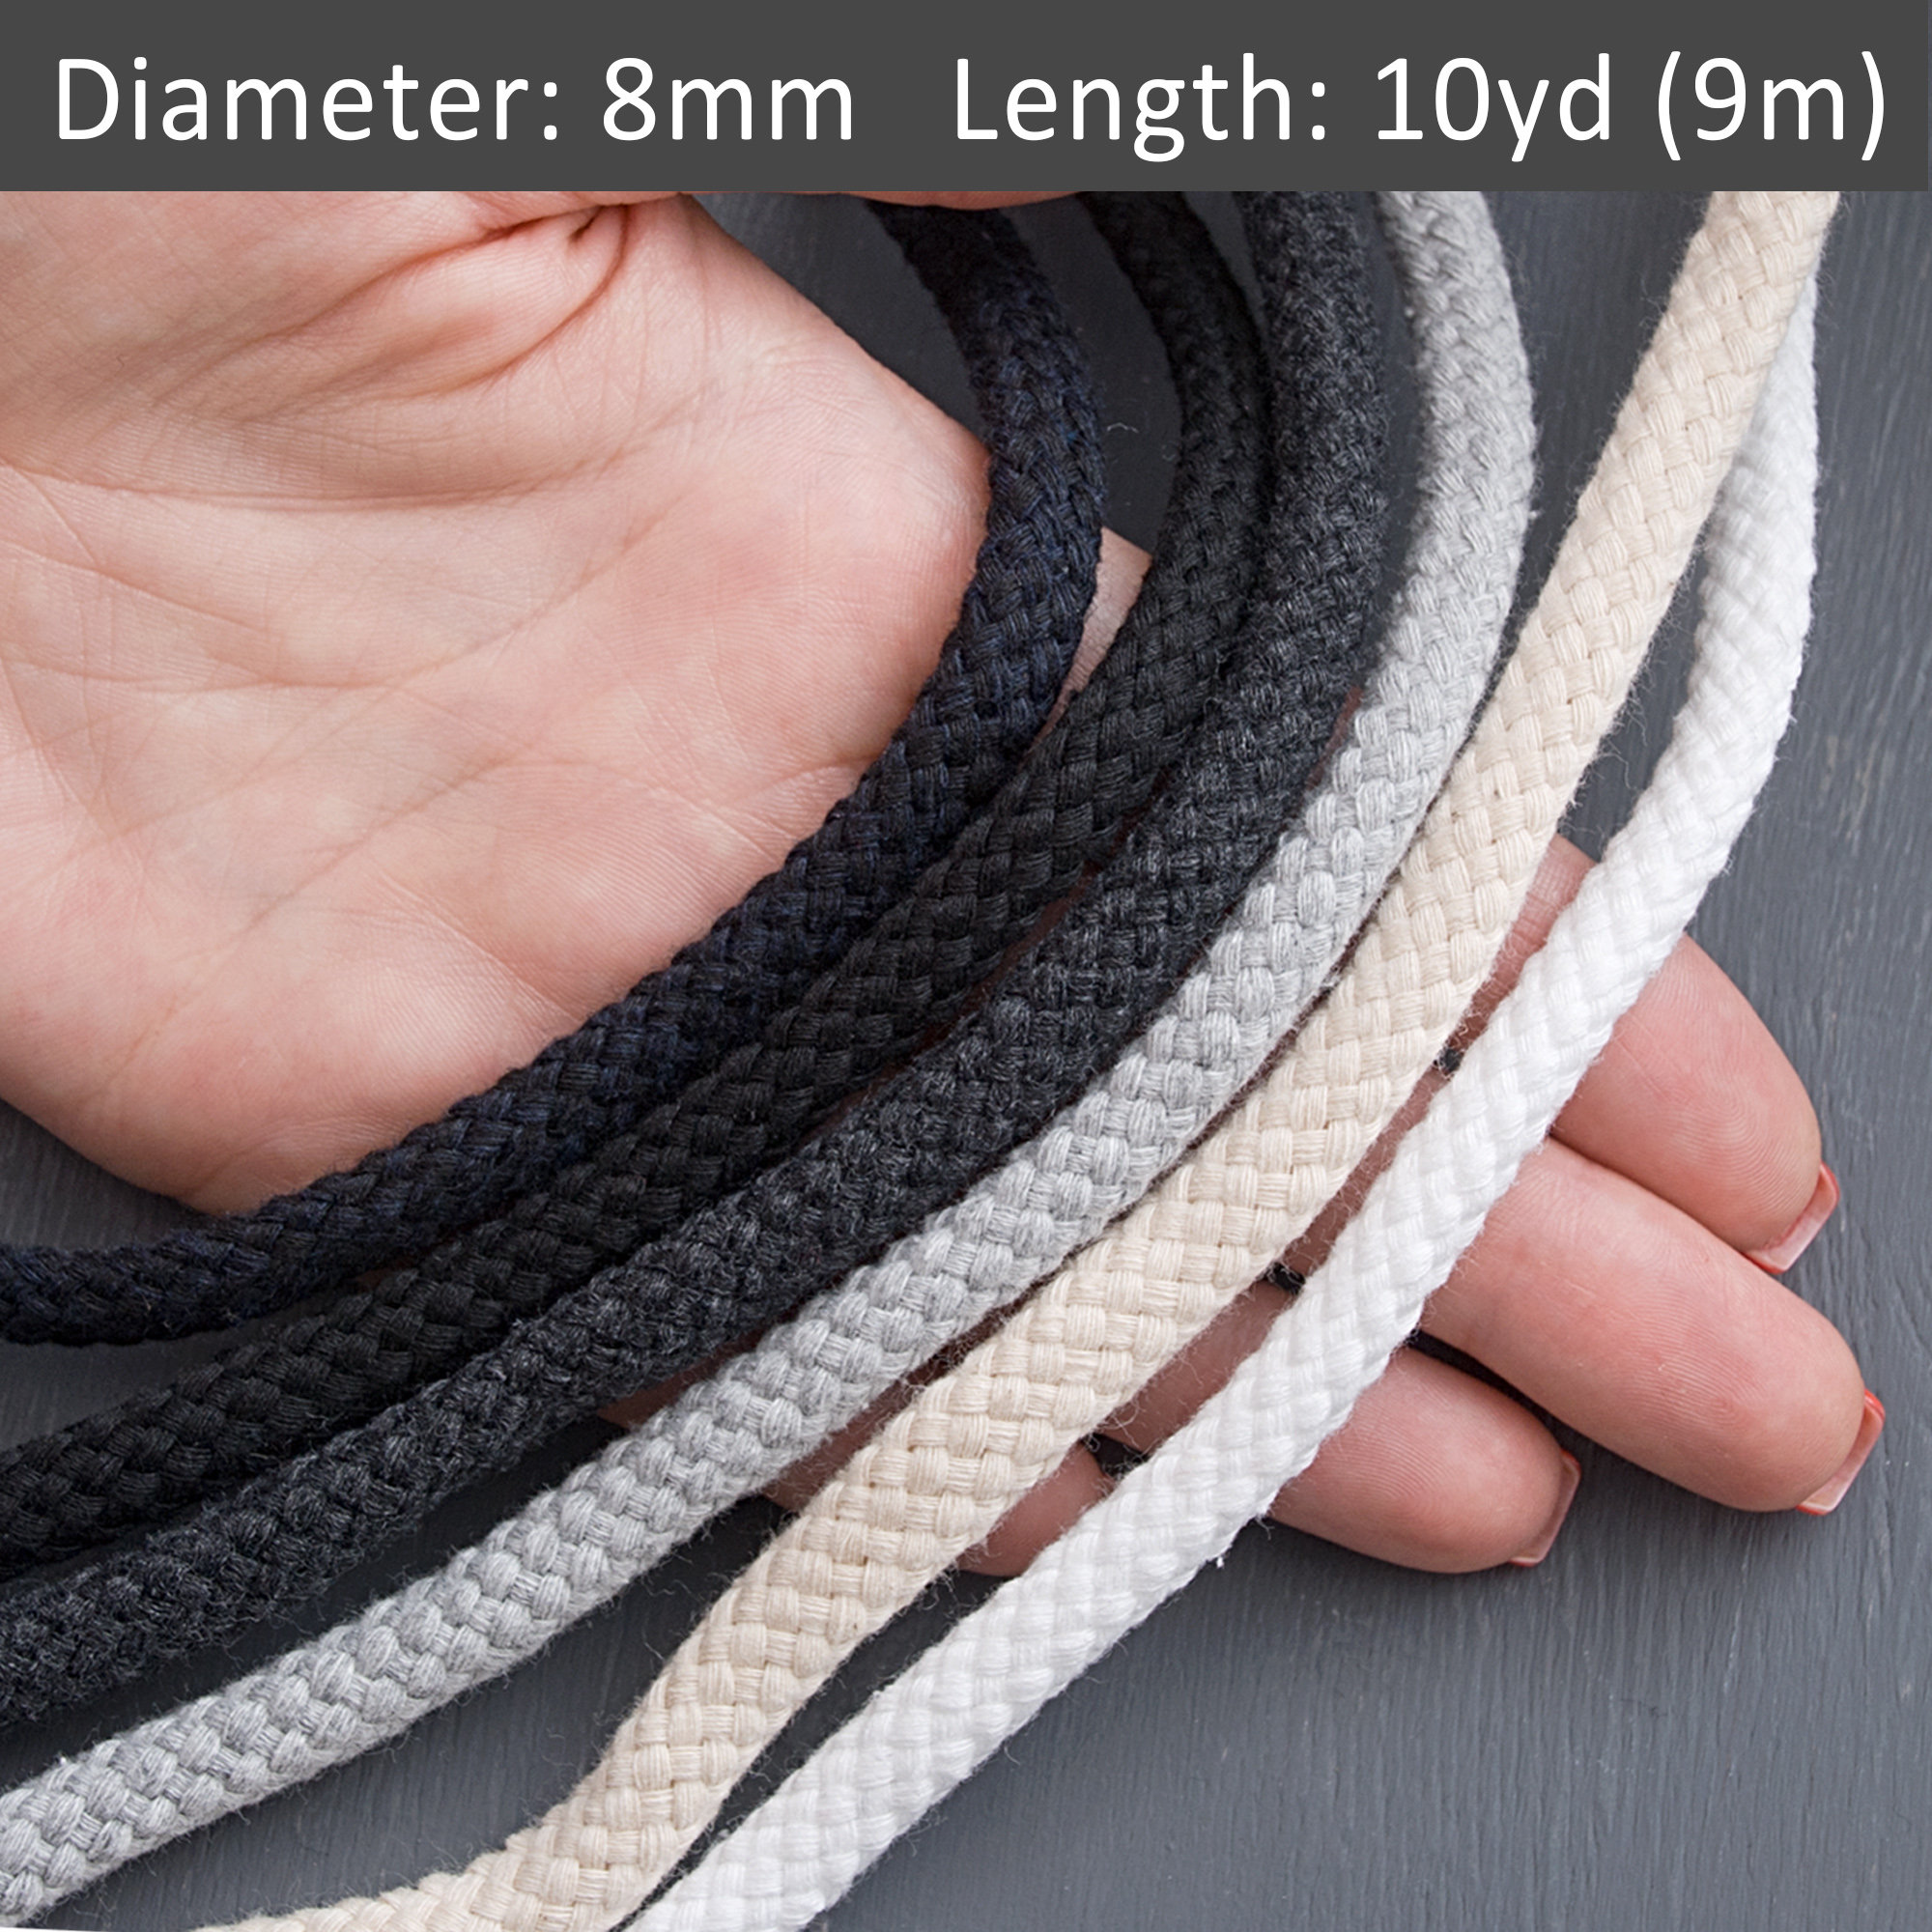 8mm Cotton Braided Rope 30ft, Drawstring Cord, Wall Art Home Decor Rope,  Macrame Cord, Cord for Crafting / 30ft 10yd 9m 